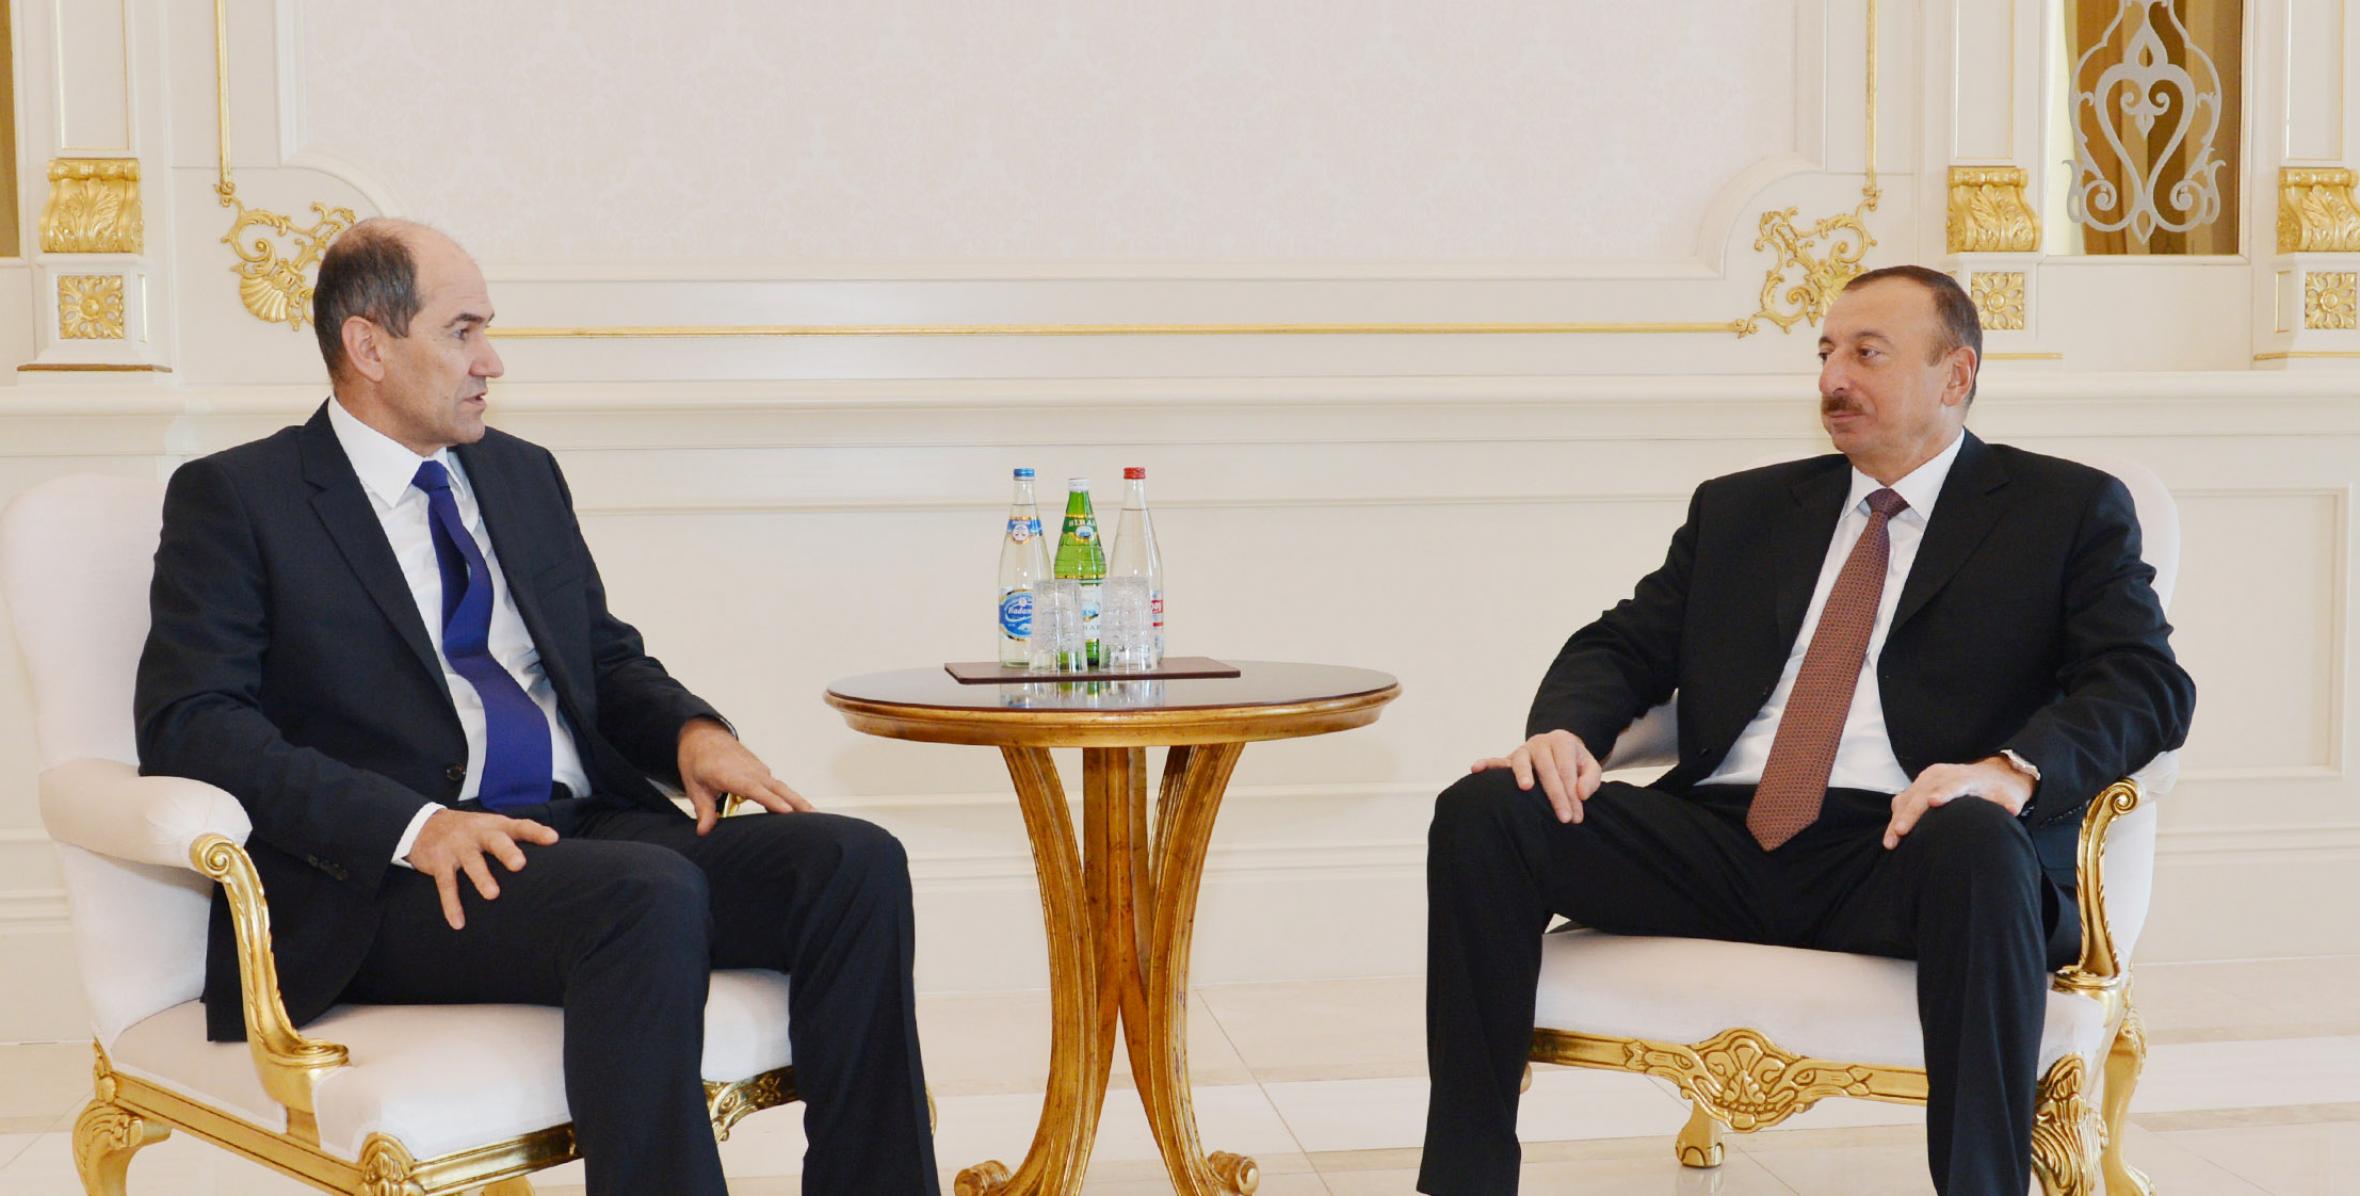 Ilham Aliyev met with Prime Minister of Slovenia